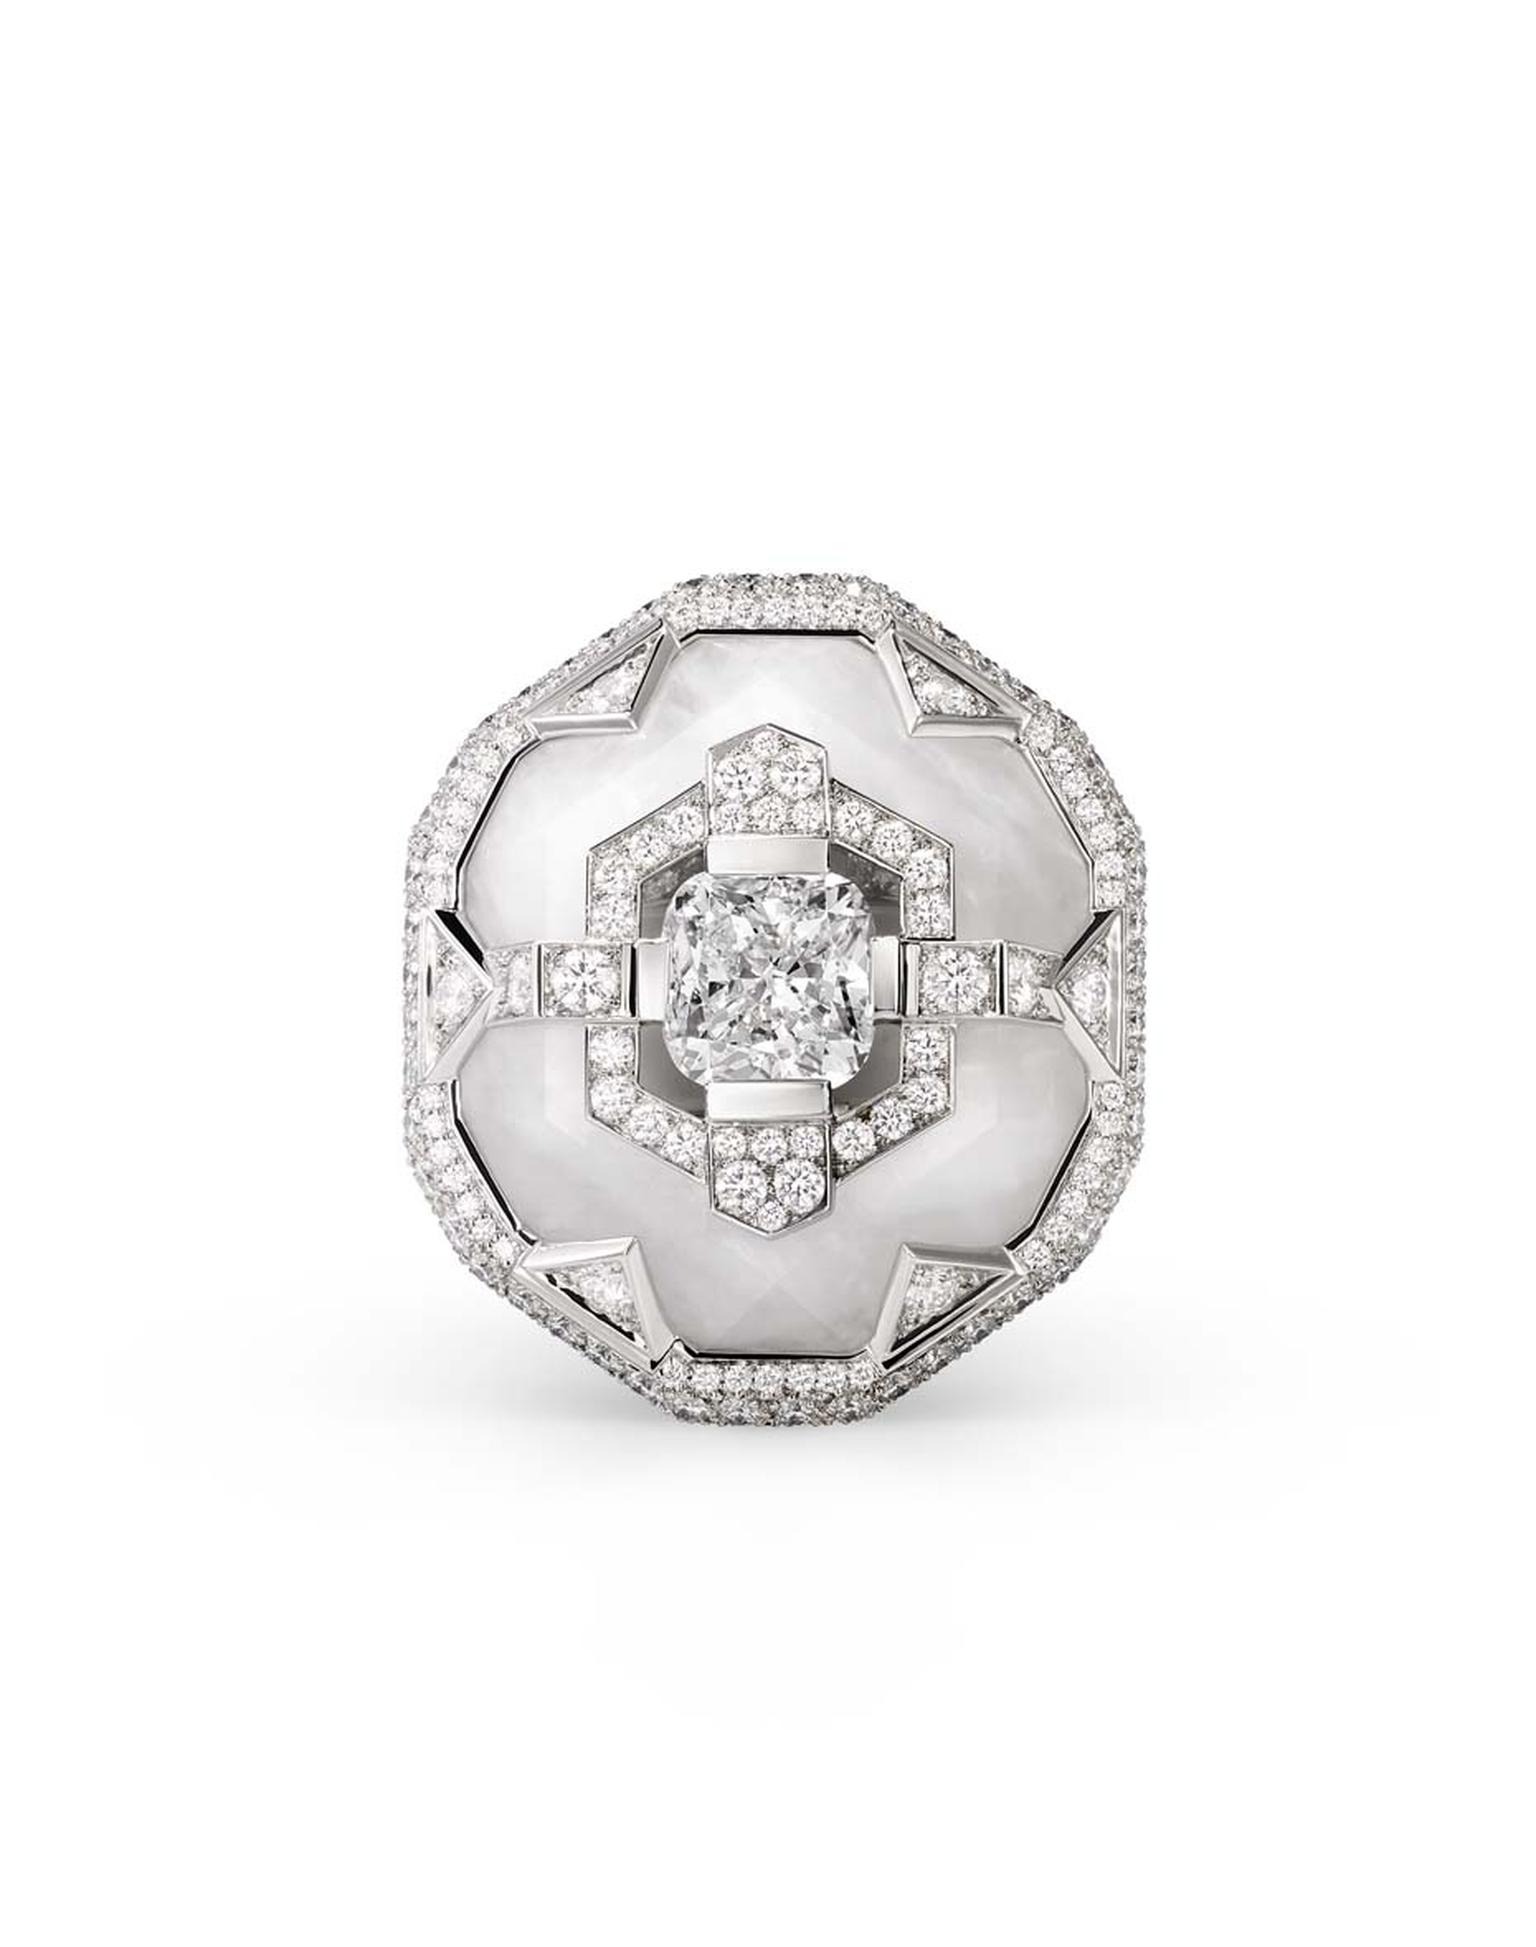 Chaumet's Lumieres d'Eau ring features a cushion-cut diamond sitting on top rock crystal, surrounded by brilliant-cut and troidia-cut diamonds.